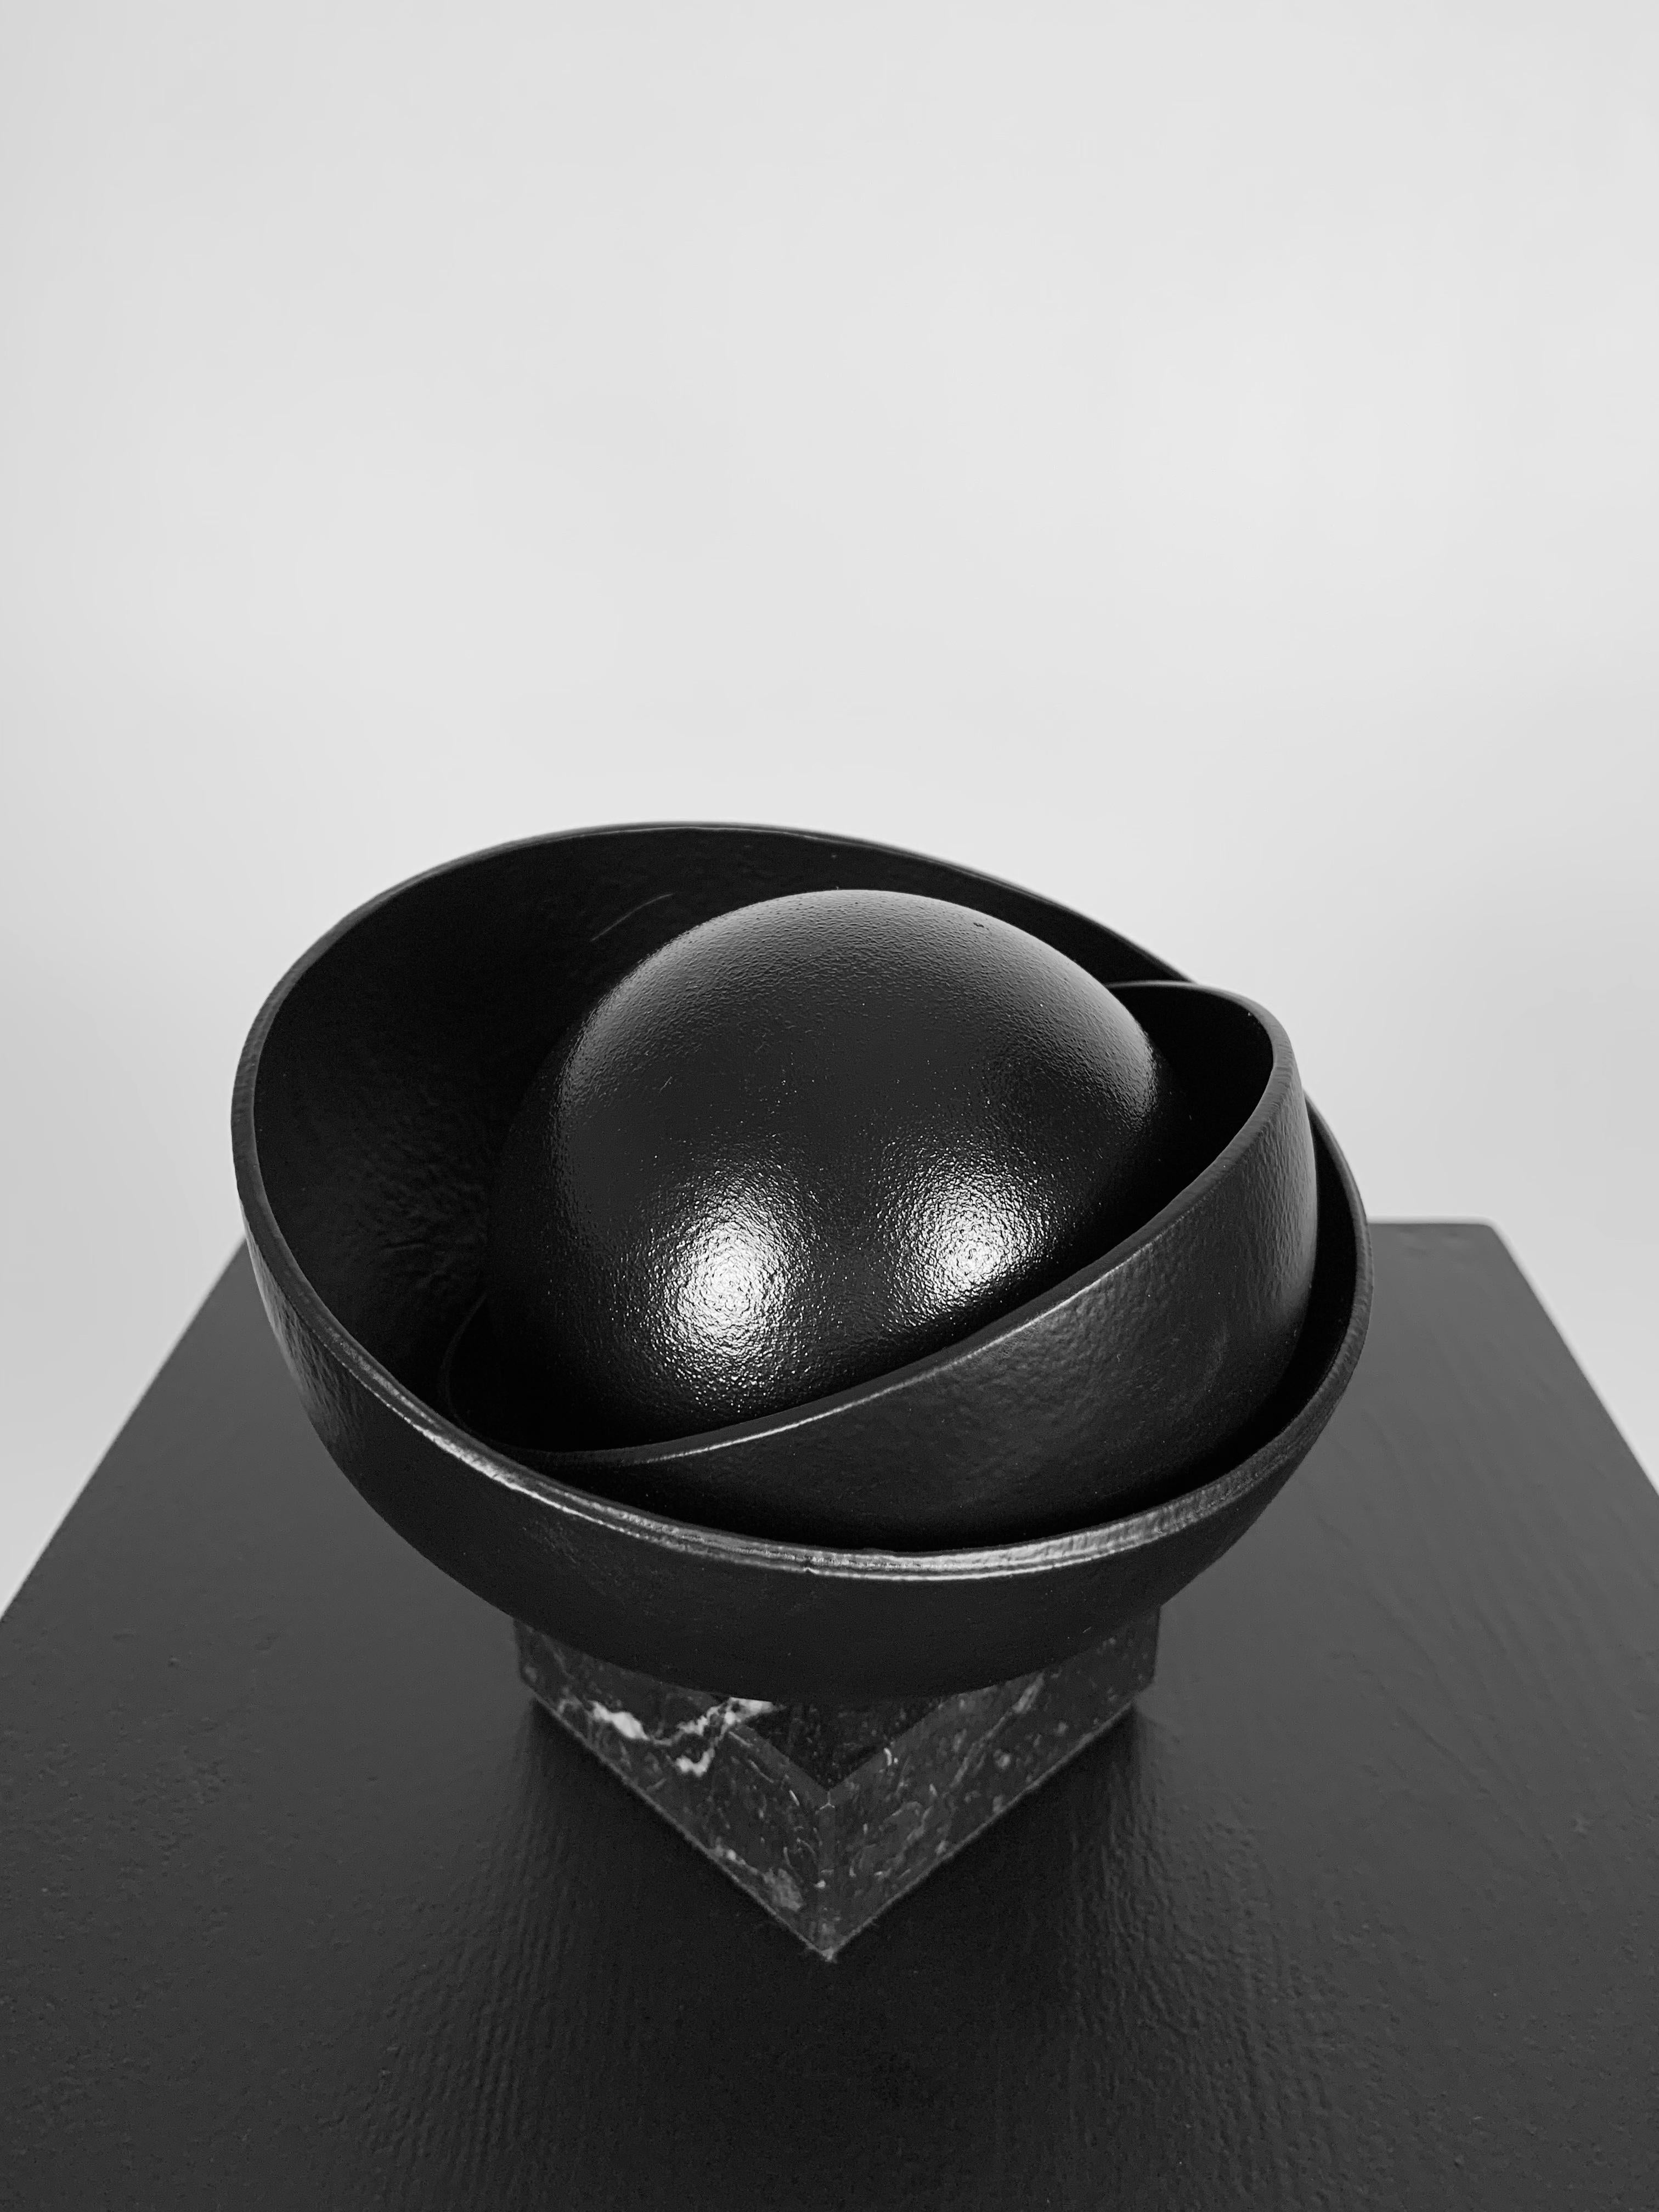 Black Shell with Big Black Pearl - Sculpture by IRENA TONE